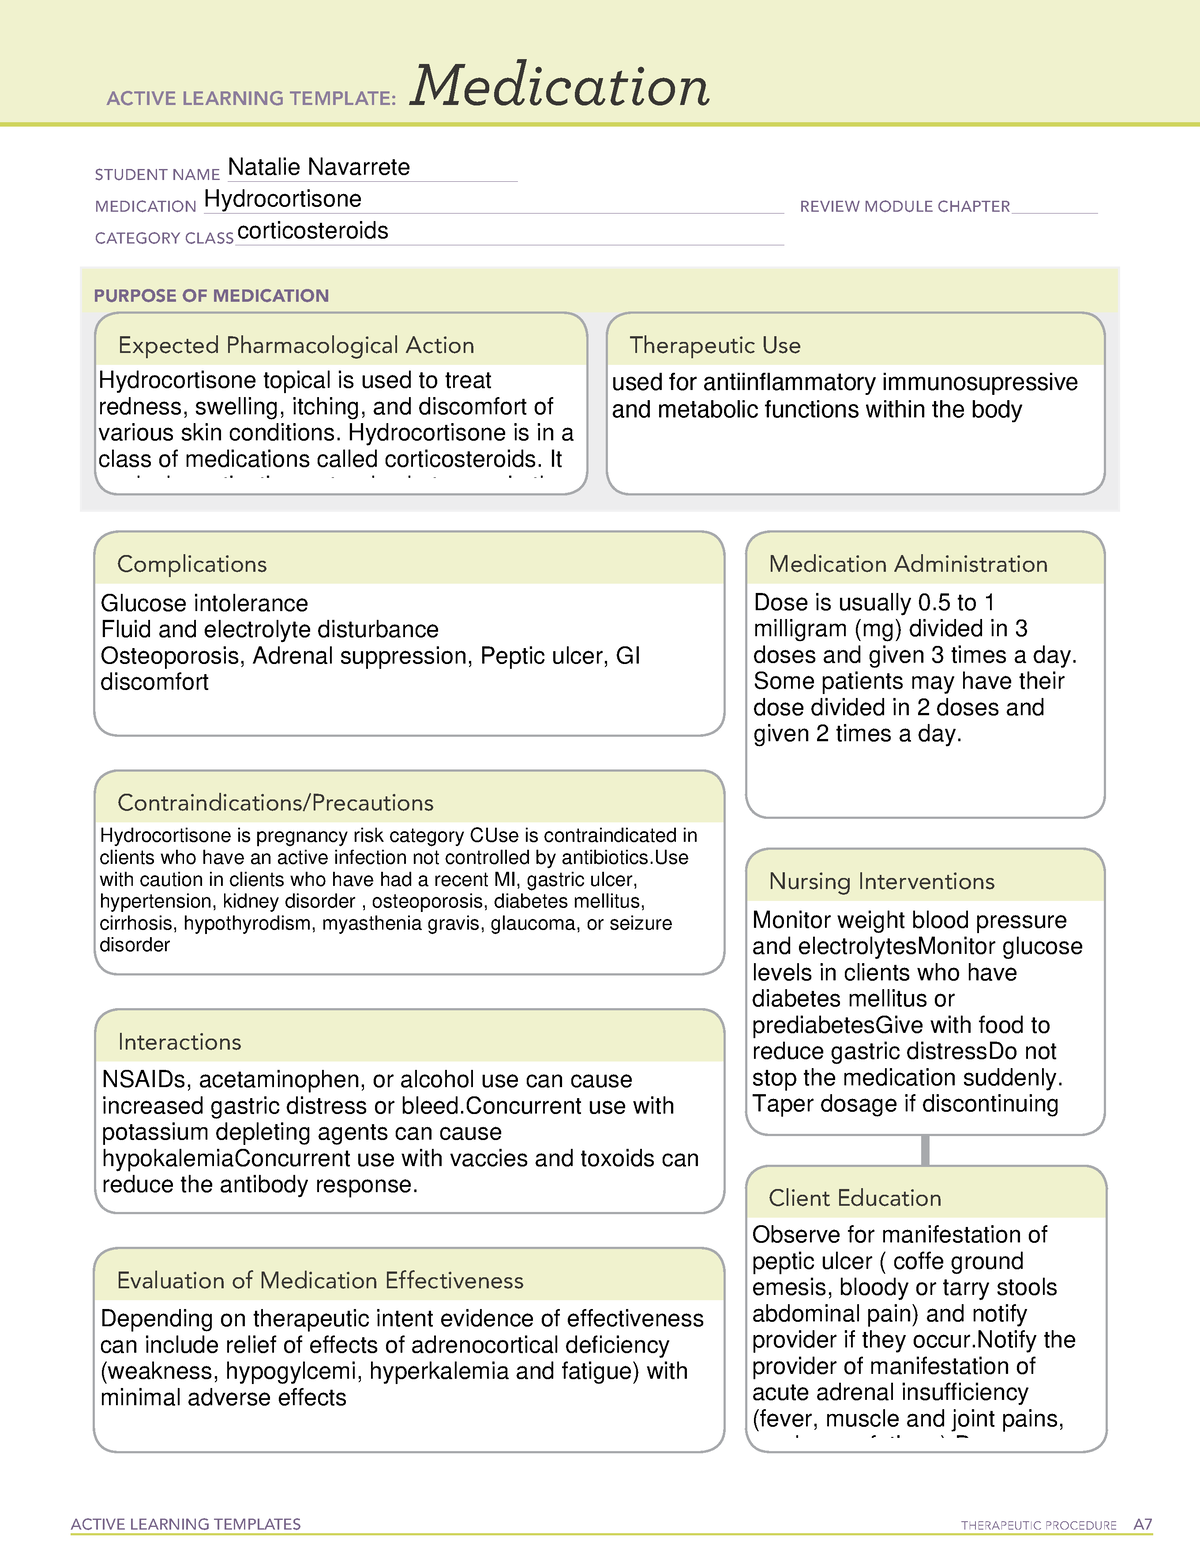 hydrocortisone-med-map-active-learning-templates-therapeutic